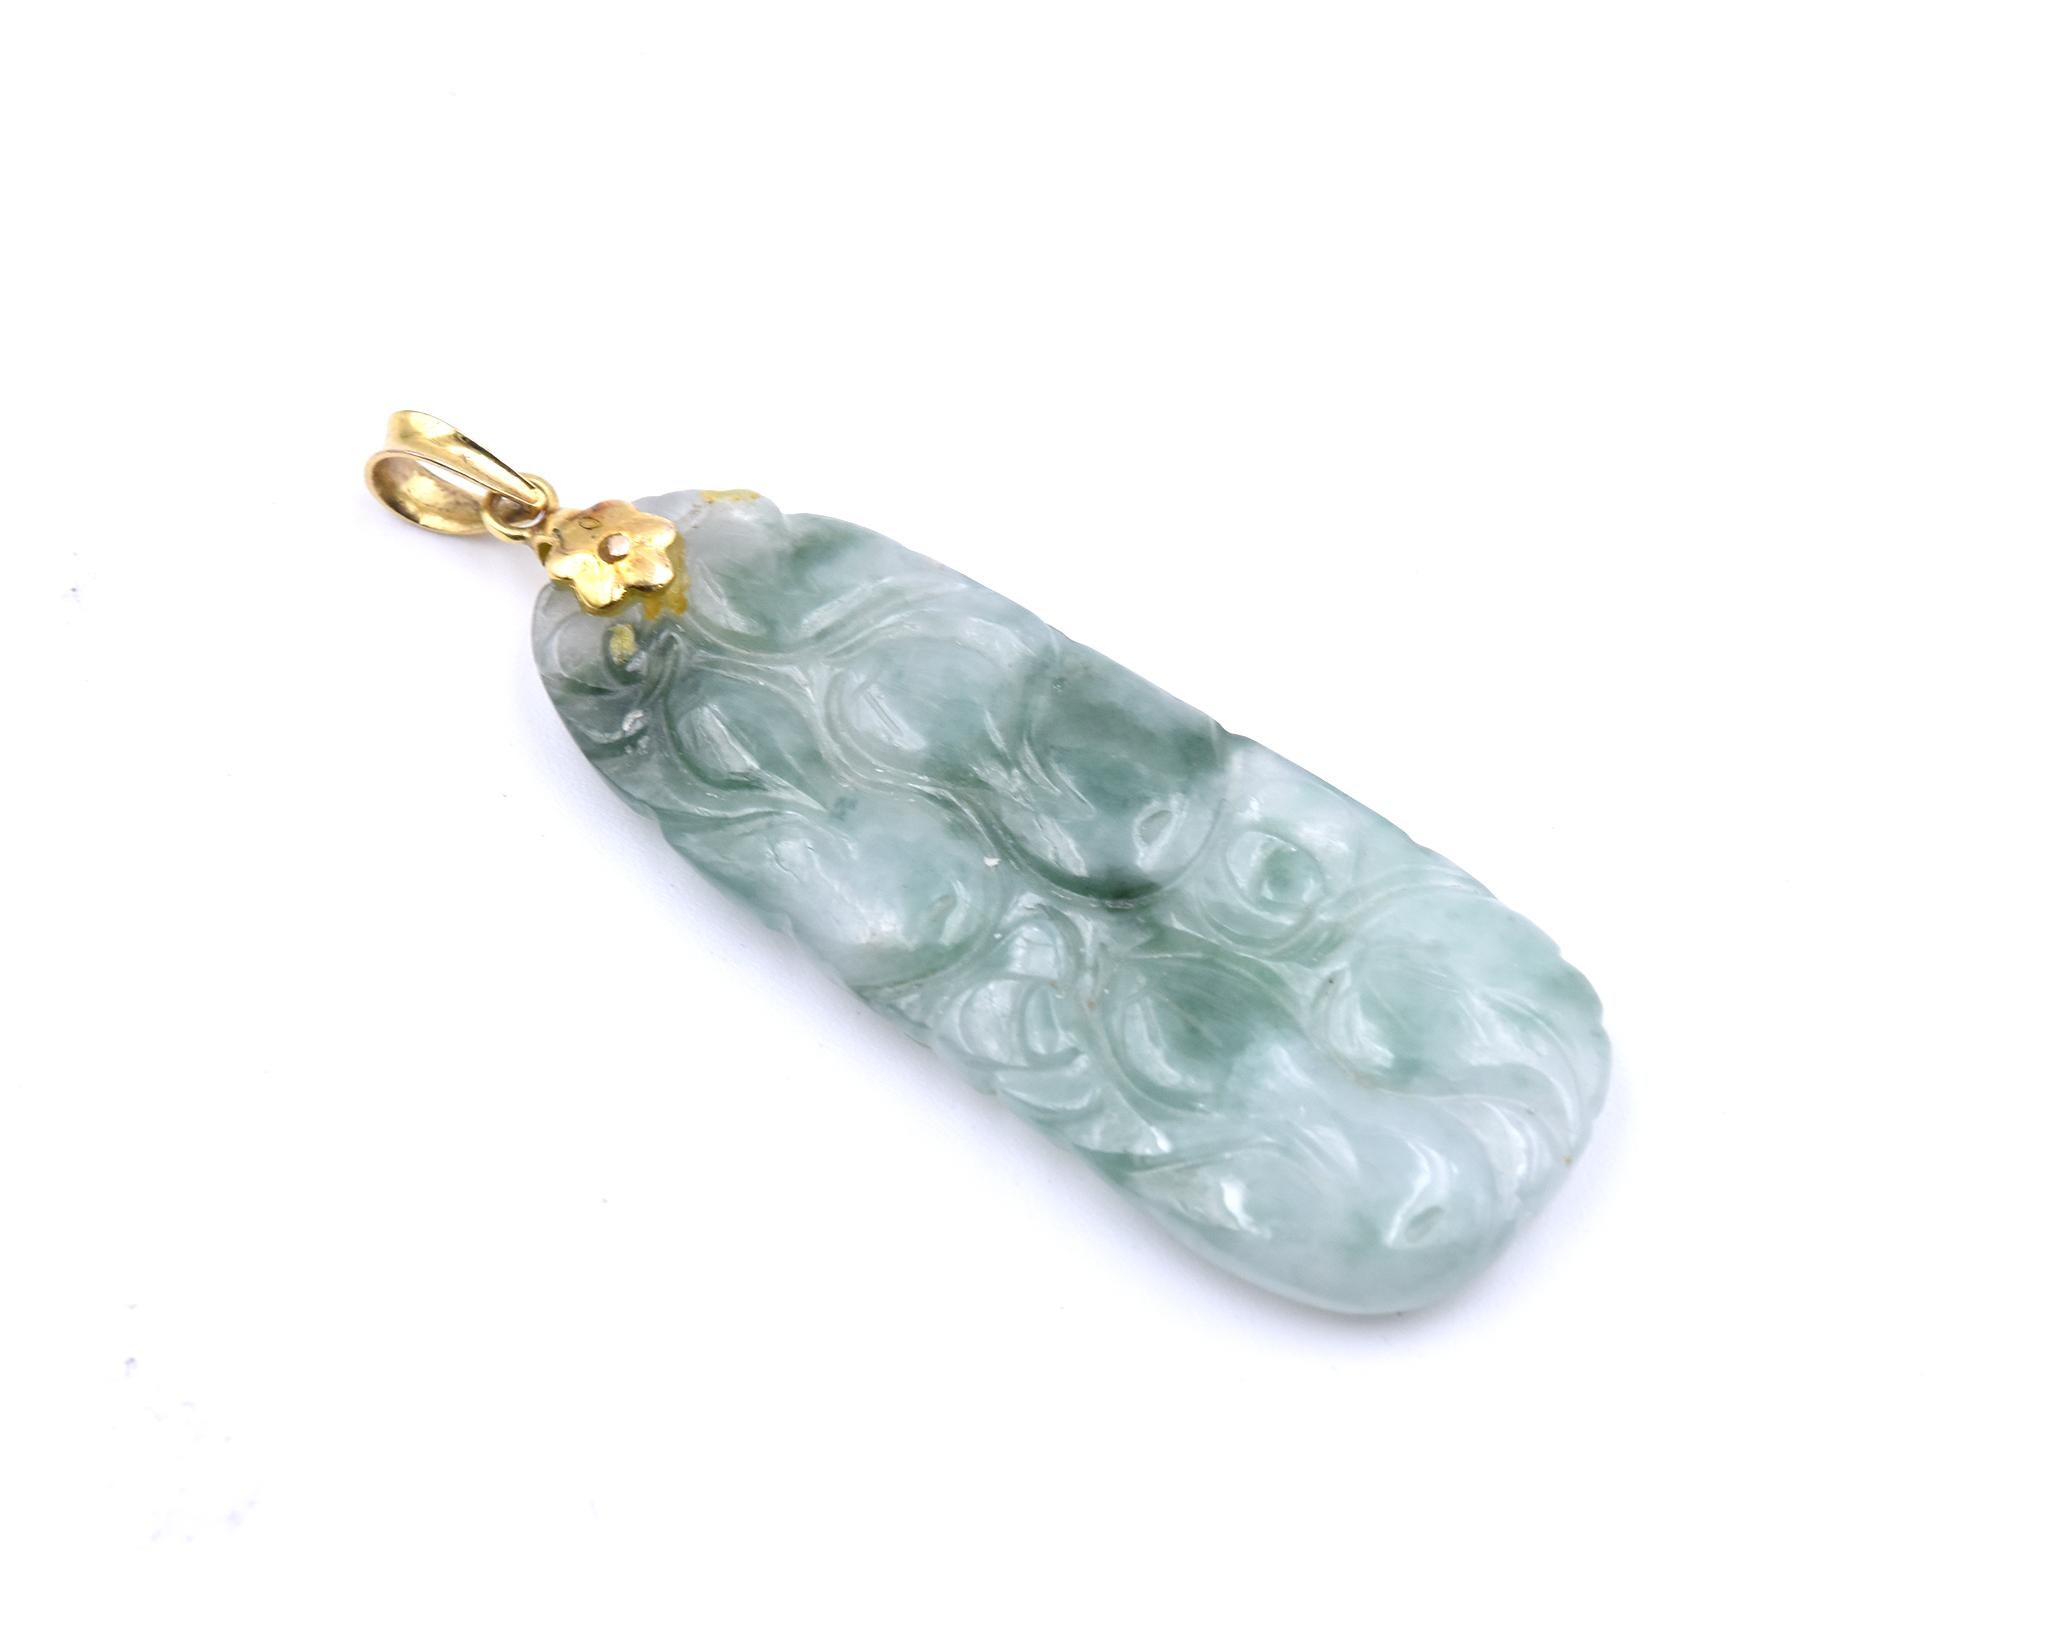 Designer: custom design
Material: 14k yellow gold 
Gemstones: jade
Dimensions: pendant measures 2 ¼-inch long with vail and it is 18.87mm wide
Weight: 8.61 grams
